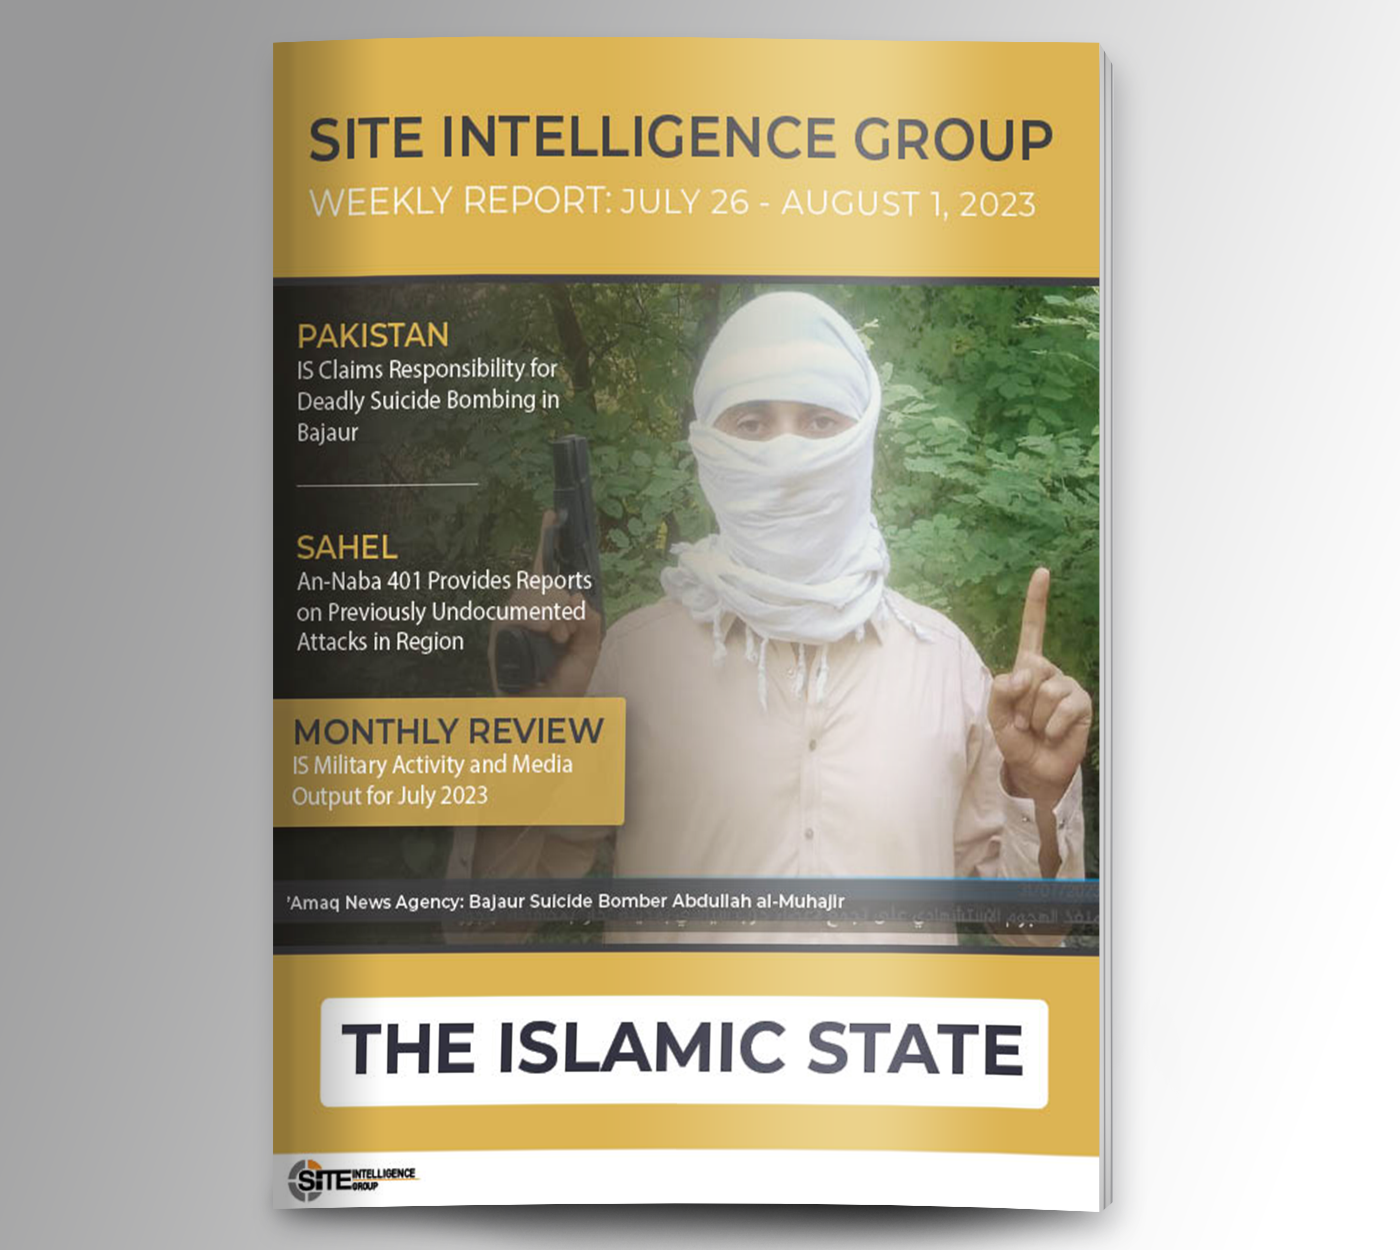 Weekly inSITE on the Islamic State for July 26-August 1, 2023